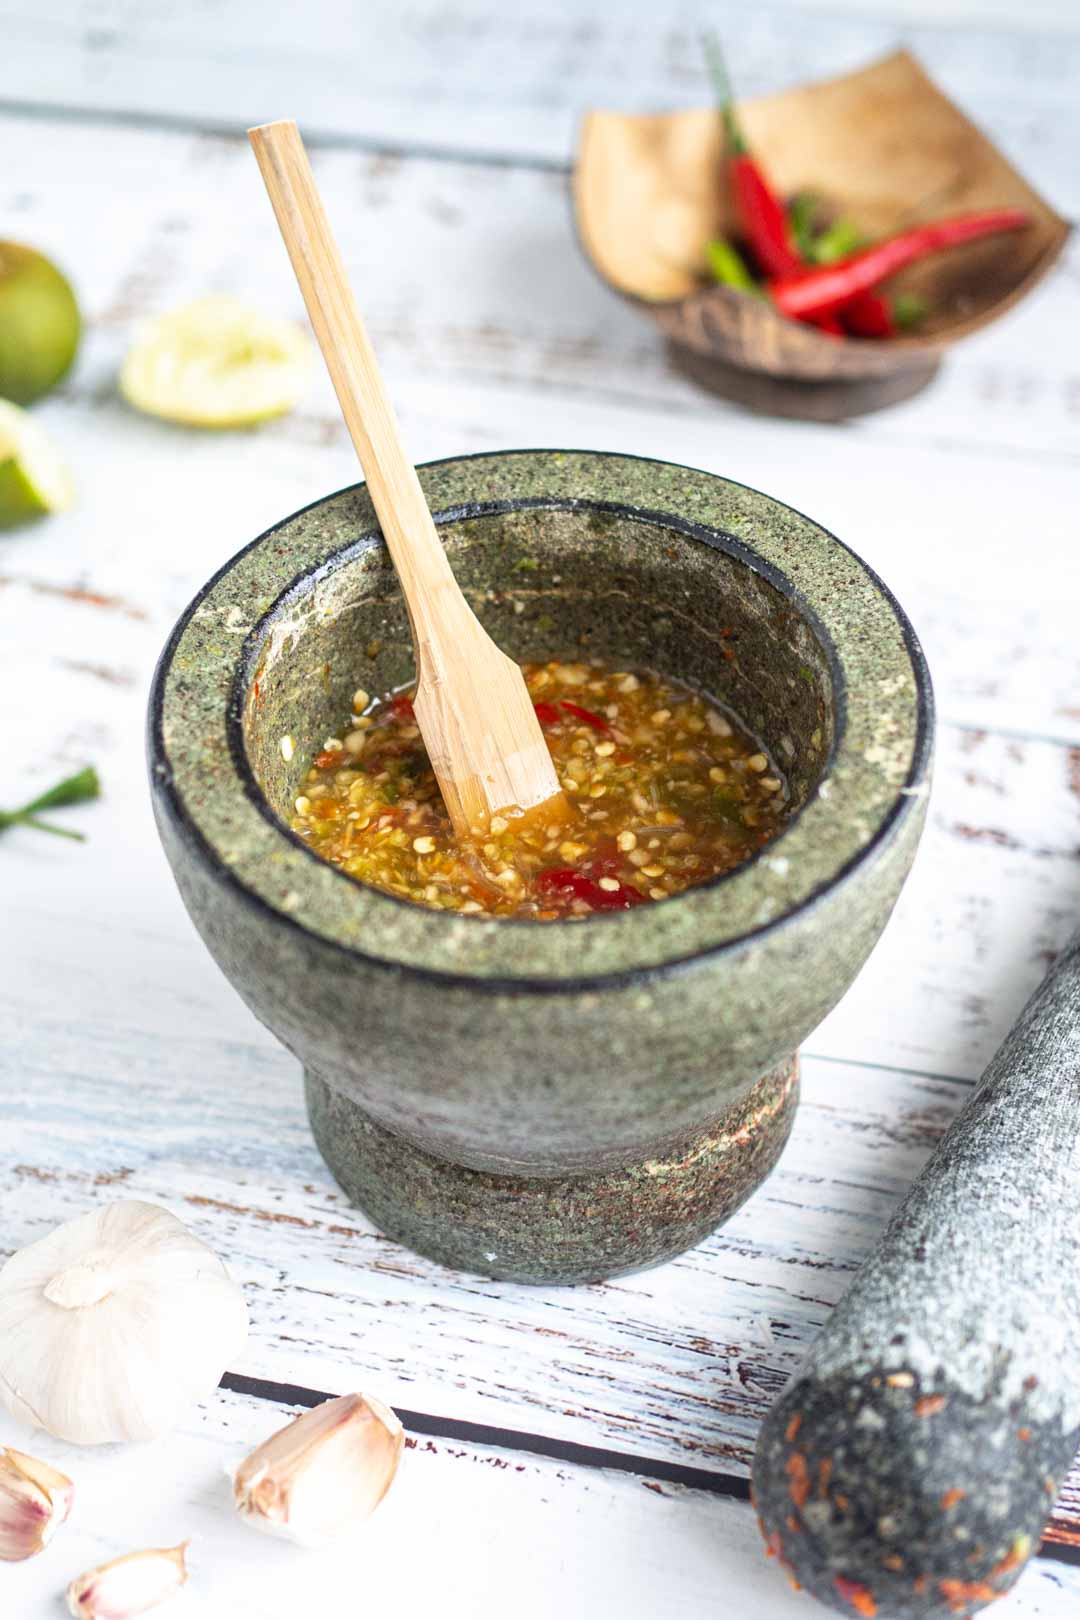 thai spicy and sour salad dressing in a mortar